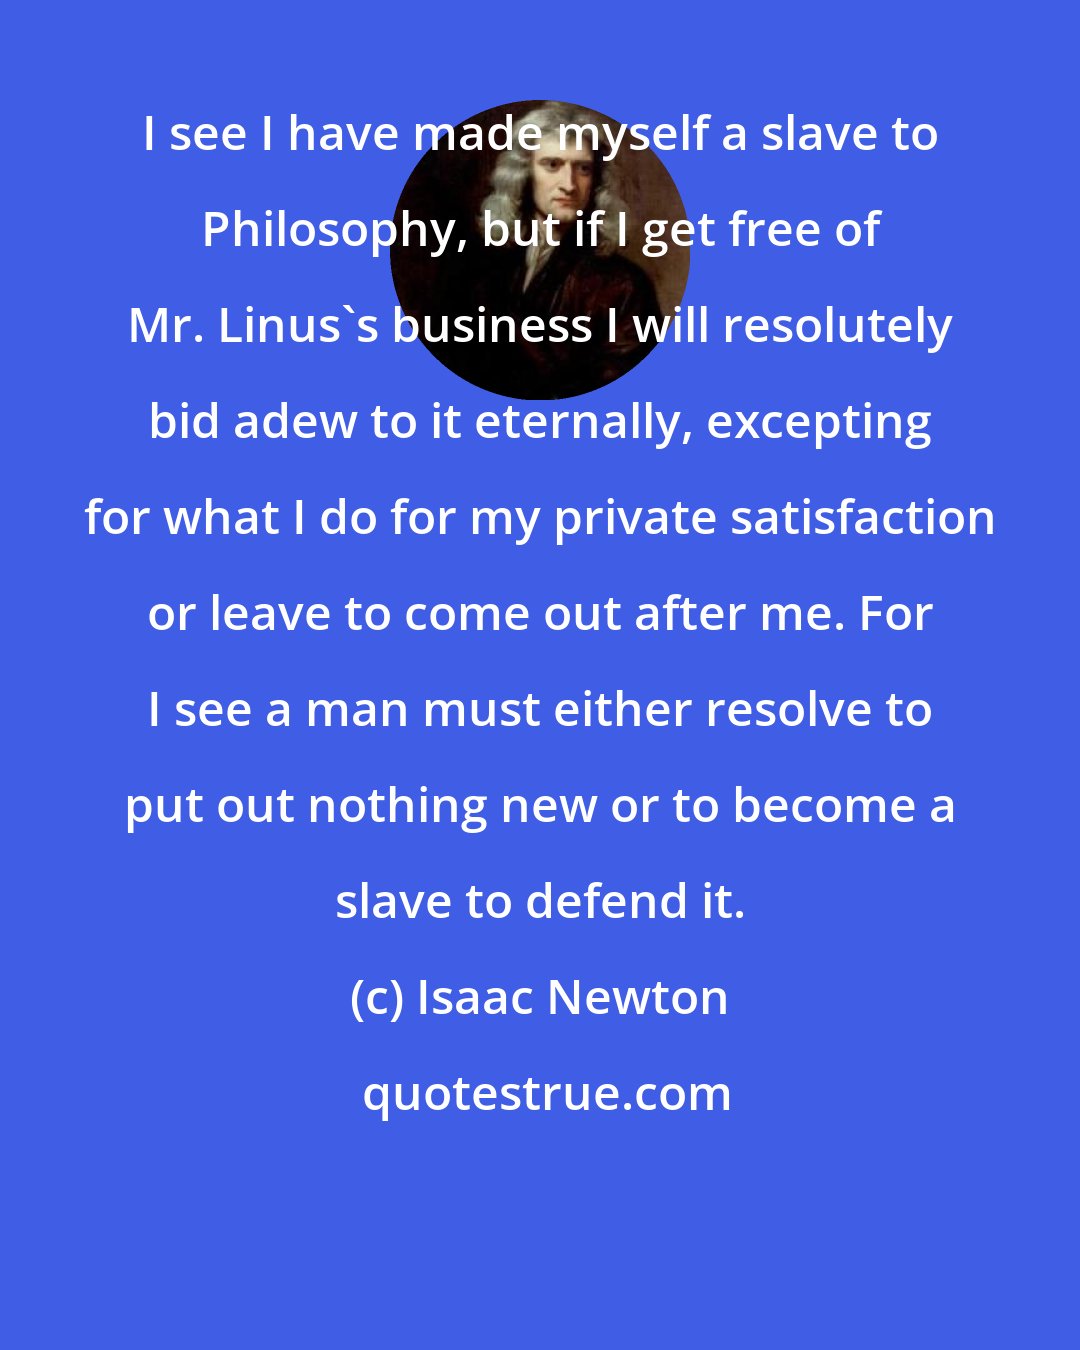 Isaac Newton: I see I have made myself a slave to Philosophy, but if I get free of Mr. Linus's business I will resolutely bid adew to it eternally, excepting for what I do for my private satisfaction or leave to come out after me. For I see a man must either resolve to put out nothing new or to become a slave to defend it.